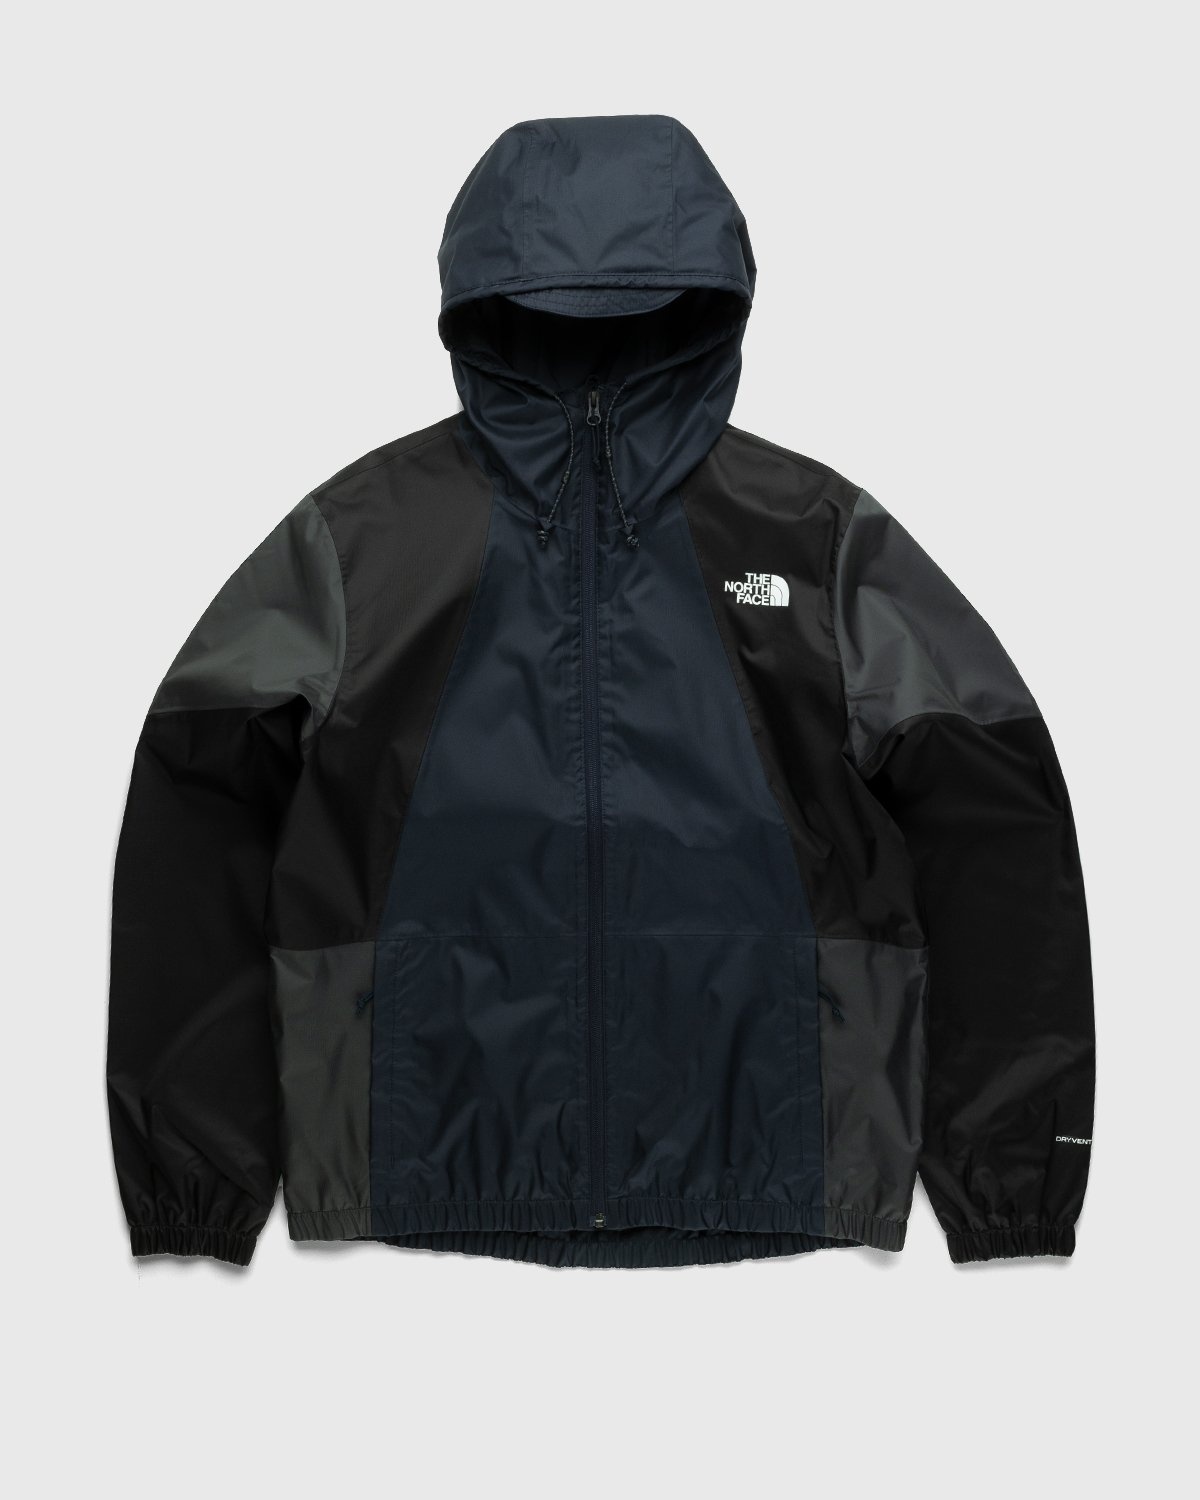 The North Face – Farside Jacket Aviator Navy - Outerwear - Blue - Image 1